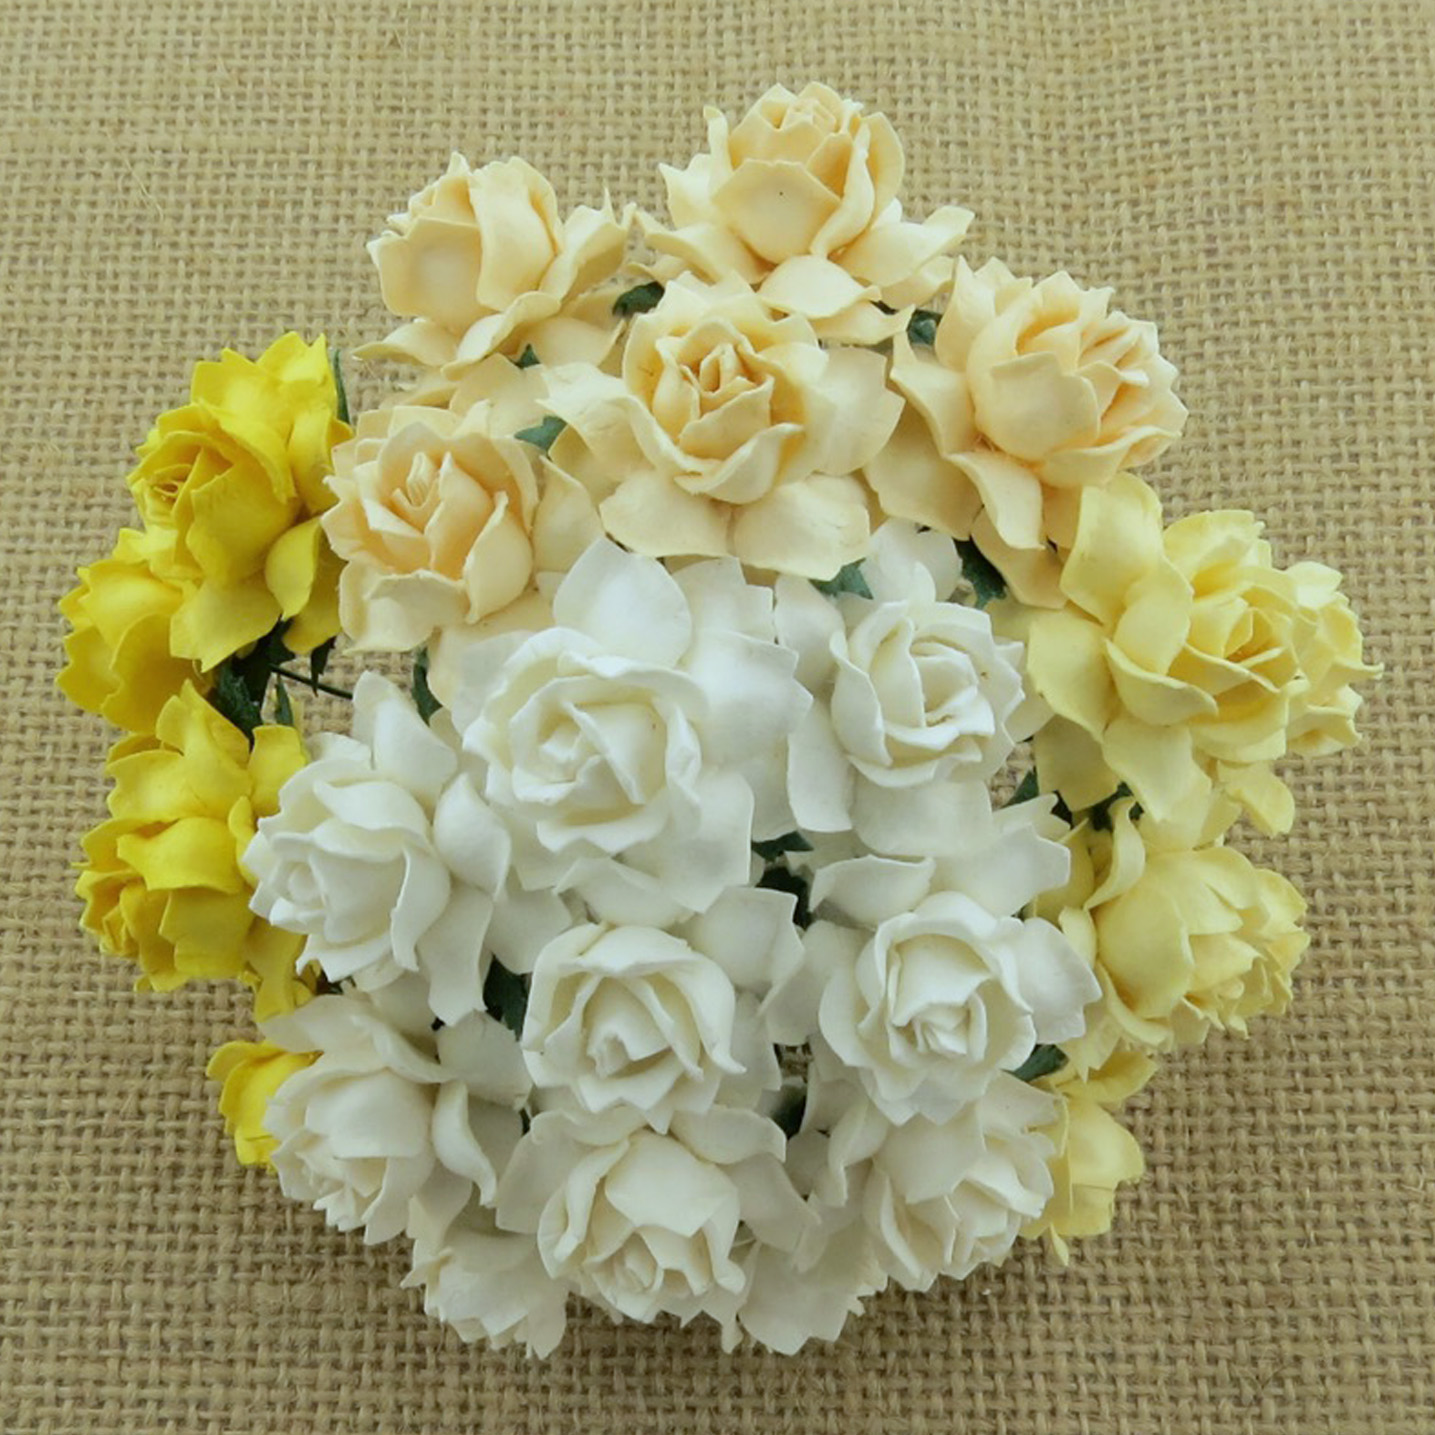 50 MIXED WHITE/CREAM MULBERRY PAPER COTTAGE ROSES - 5 COLOR